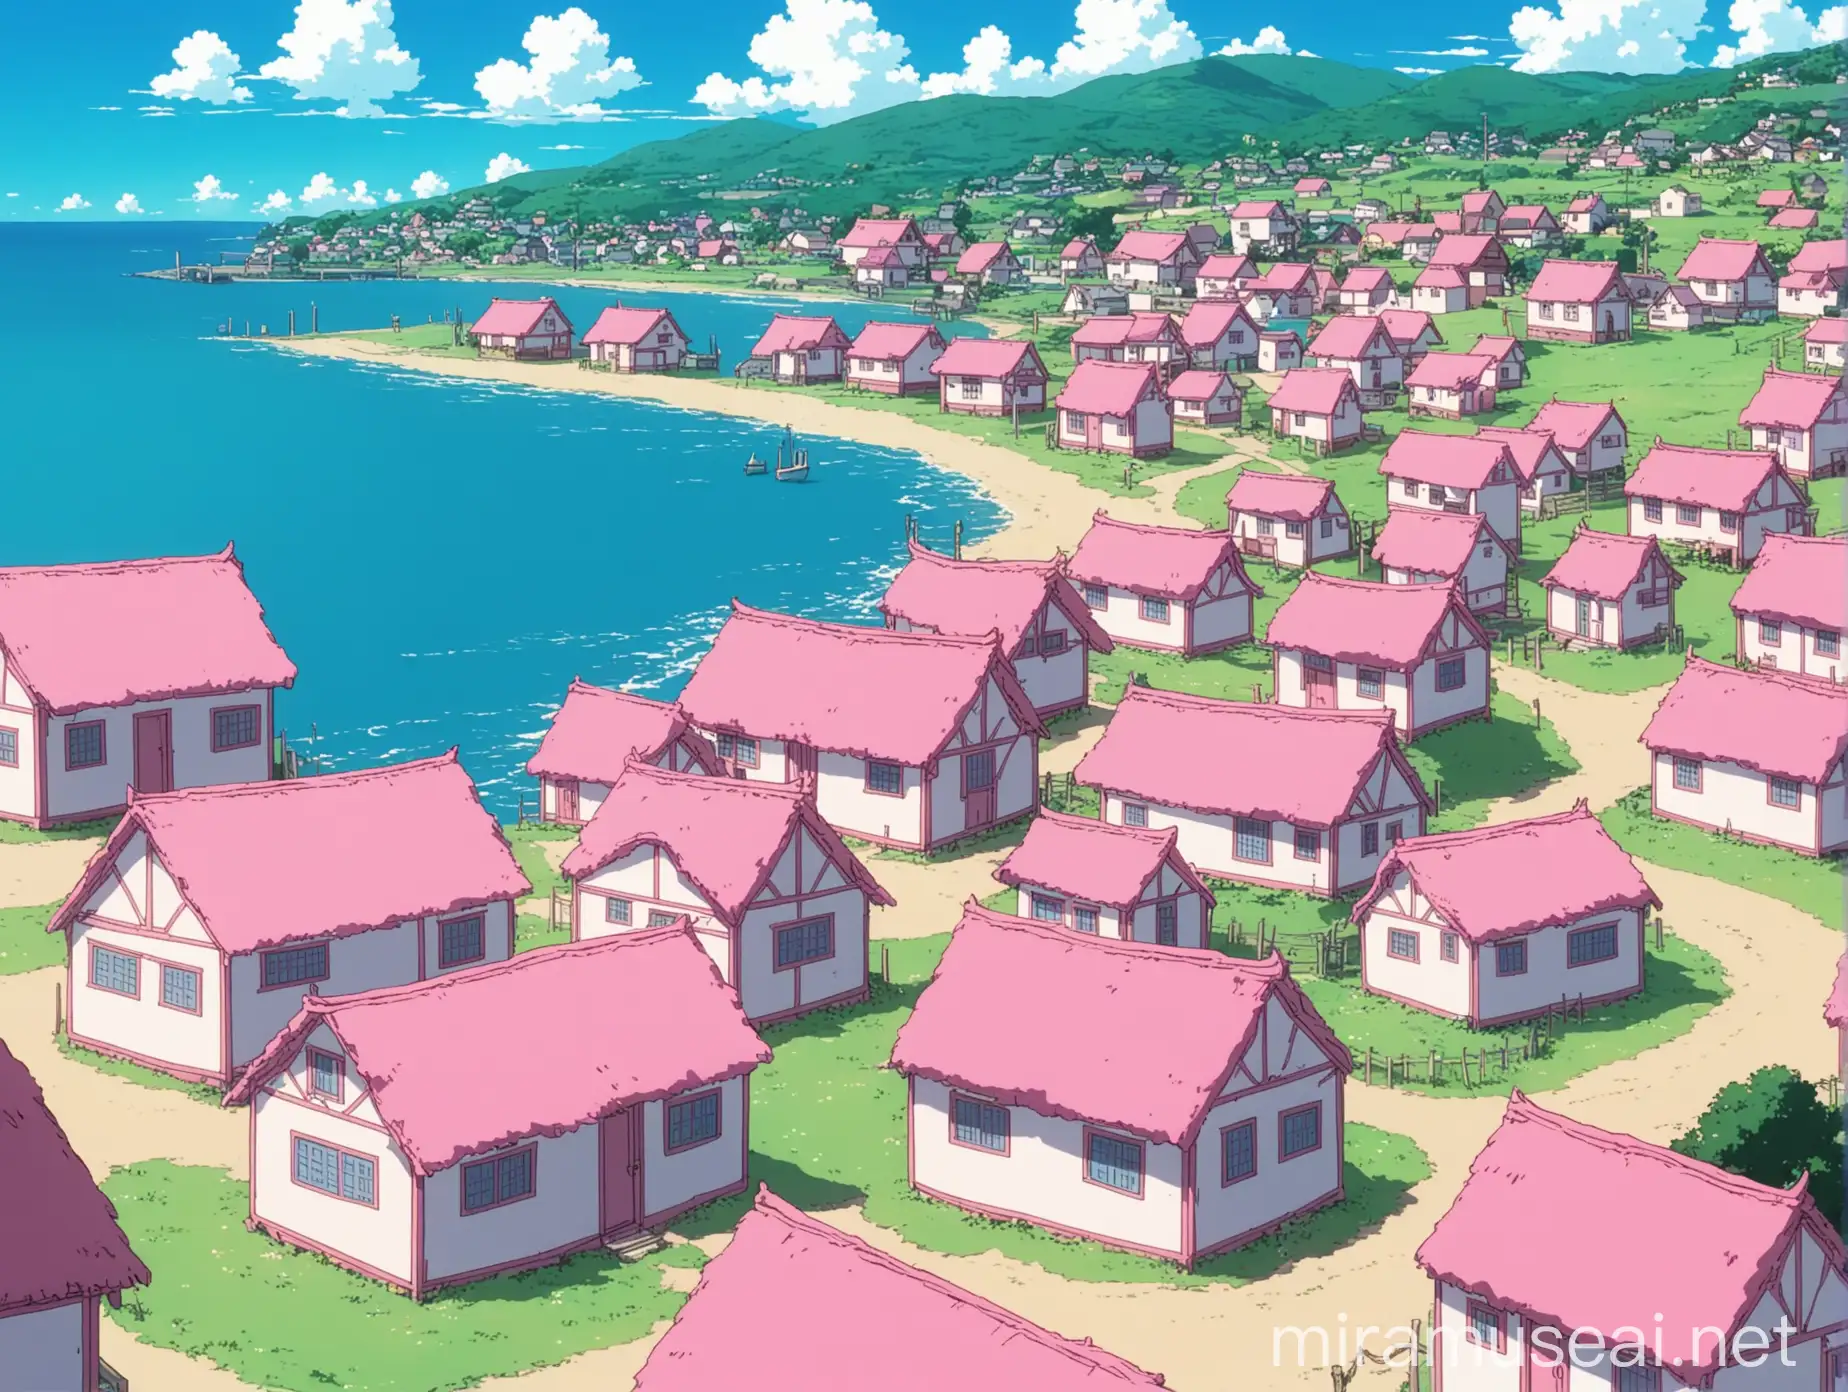 a village in front of a sea, the houses are pink, in anime